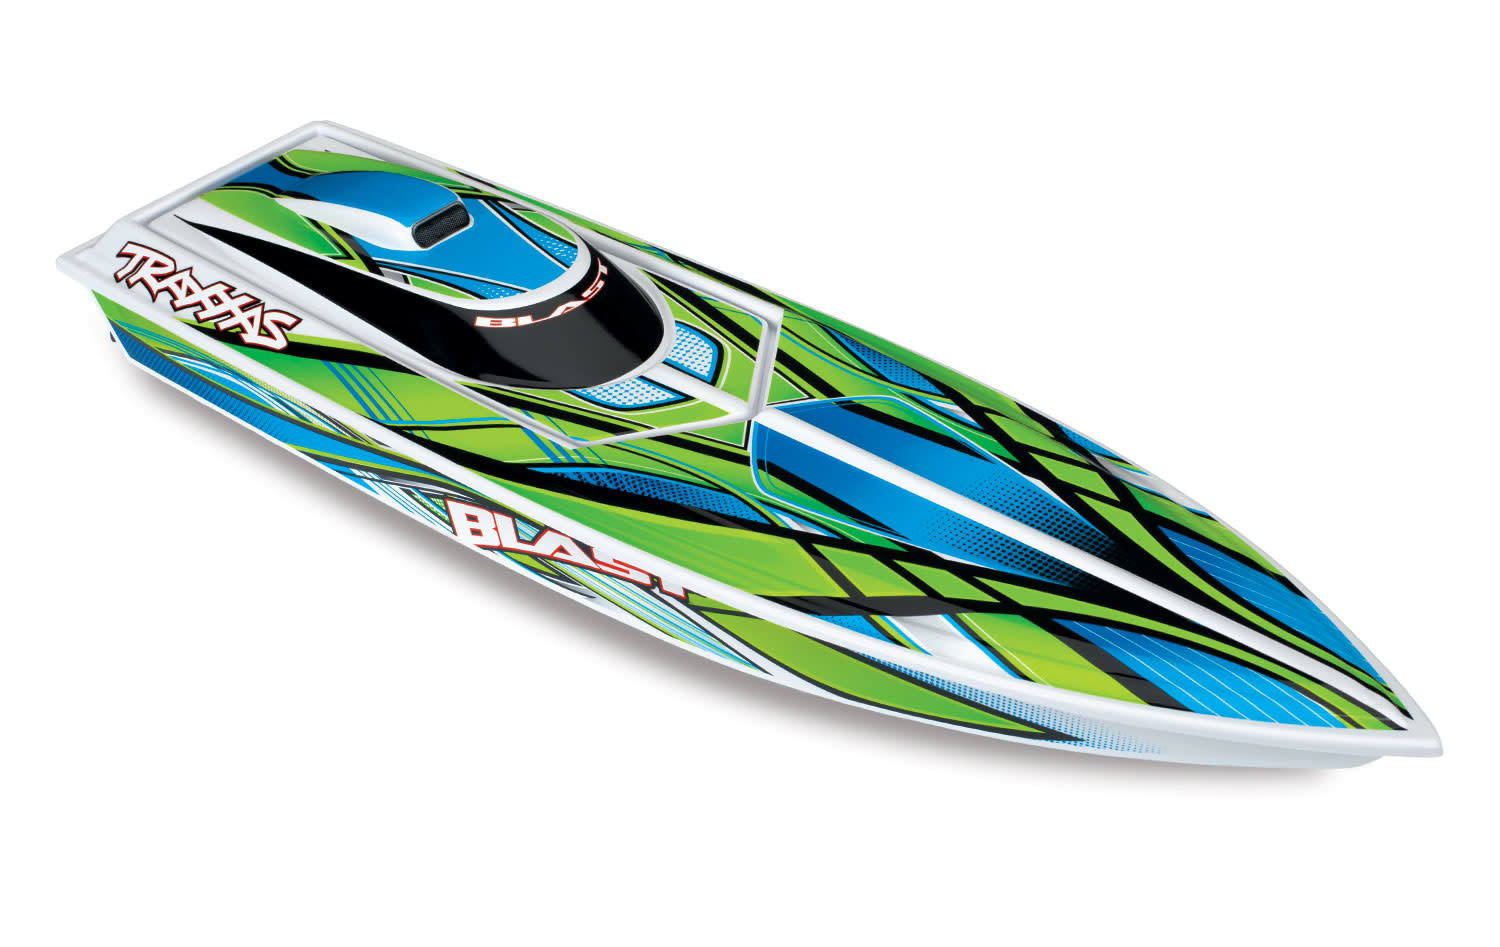 Traxxas Blast RTR Race Boat - Blue and Green, 12V